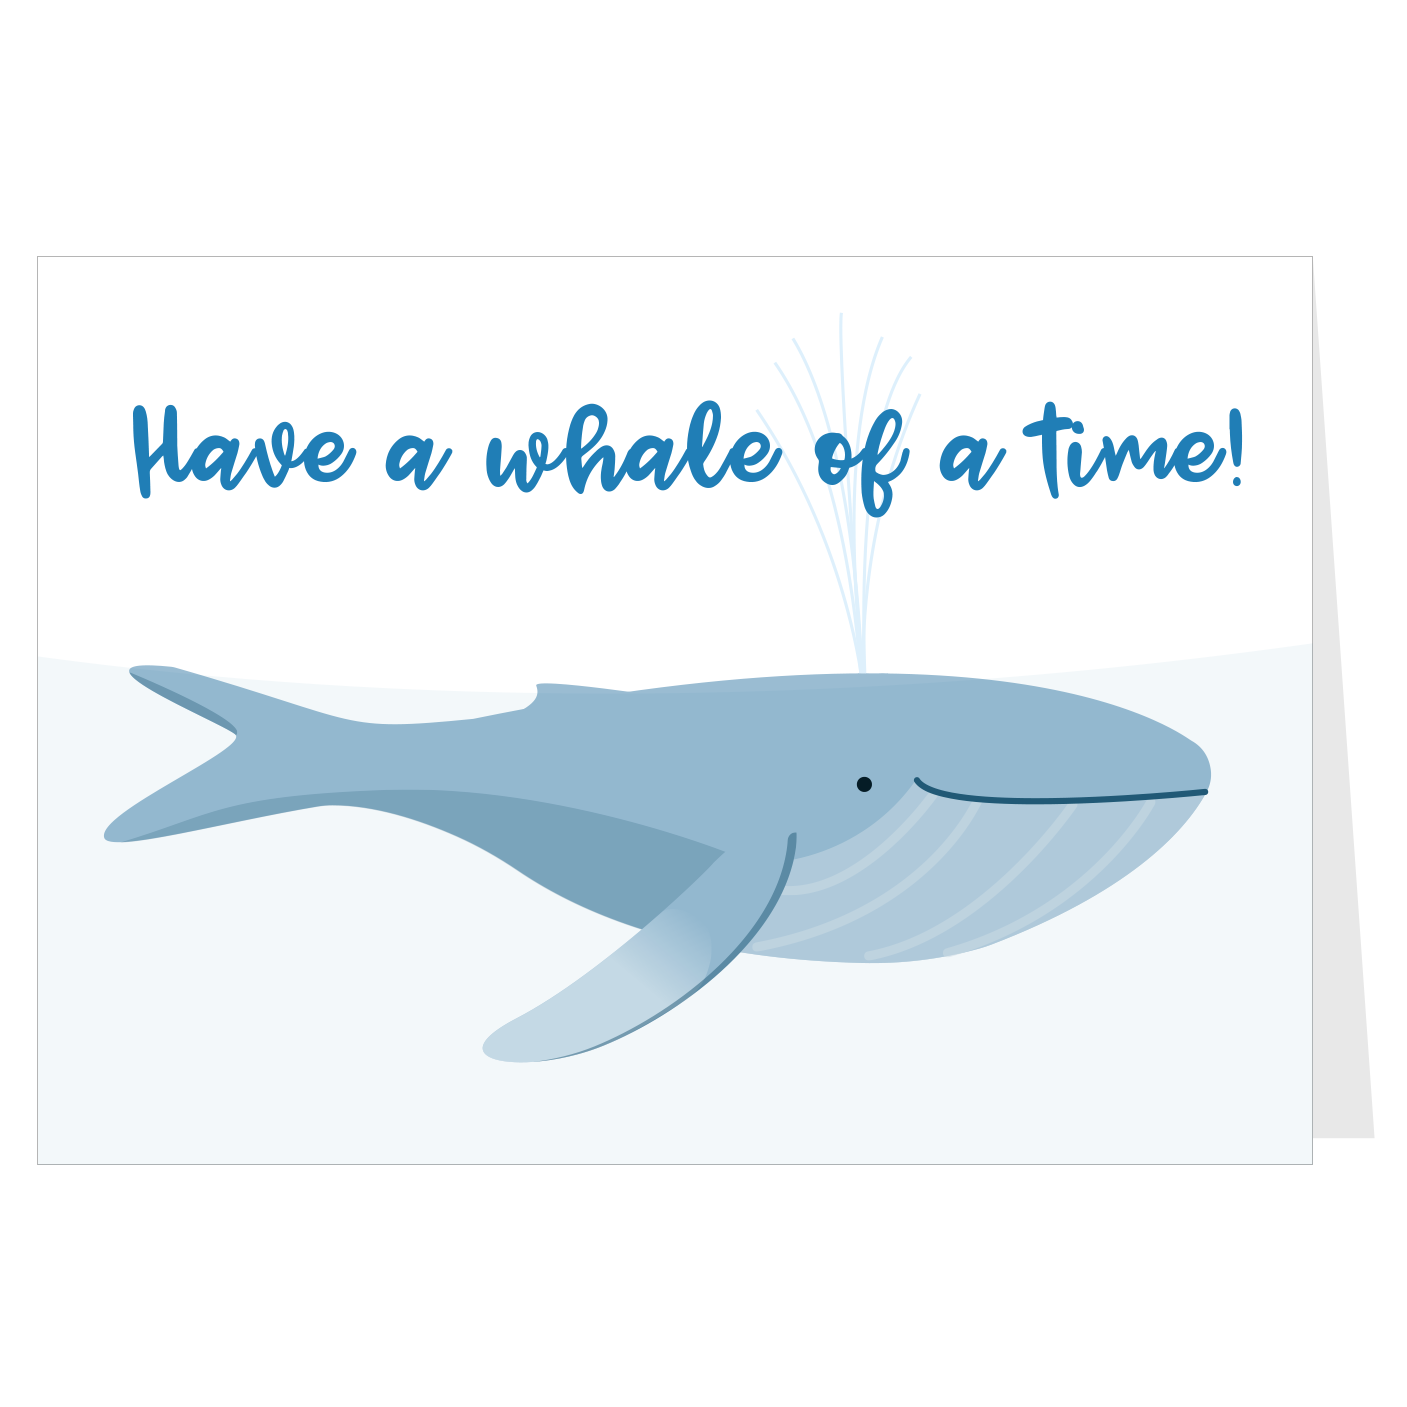 Have a whale of a time!